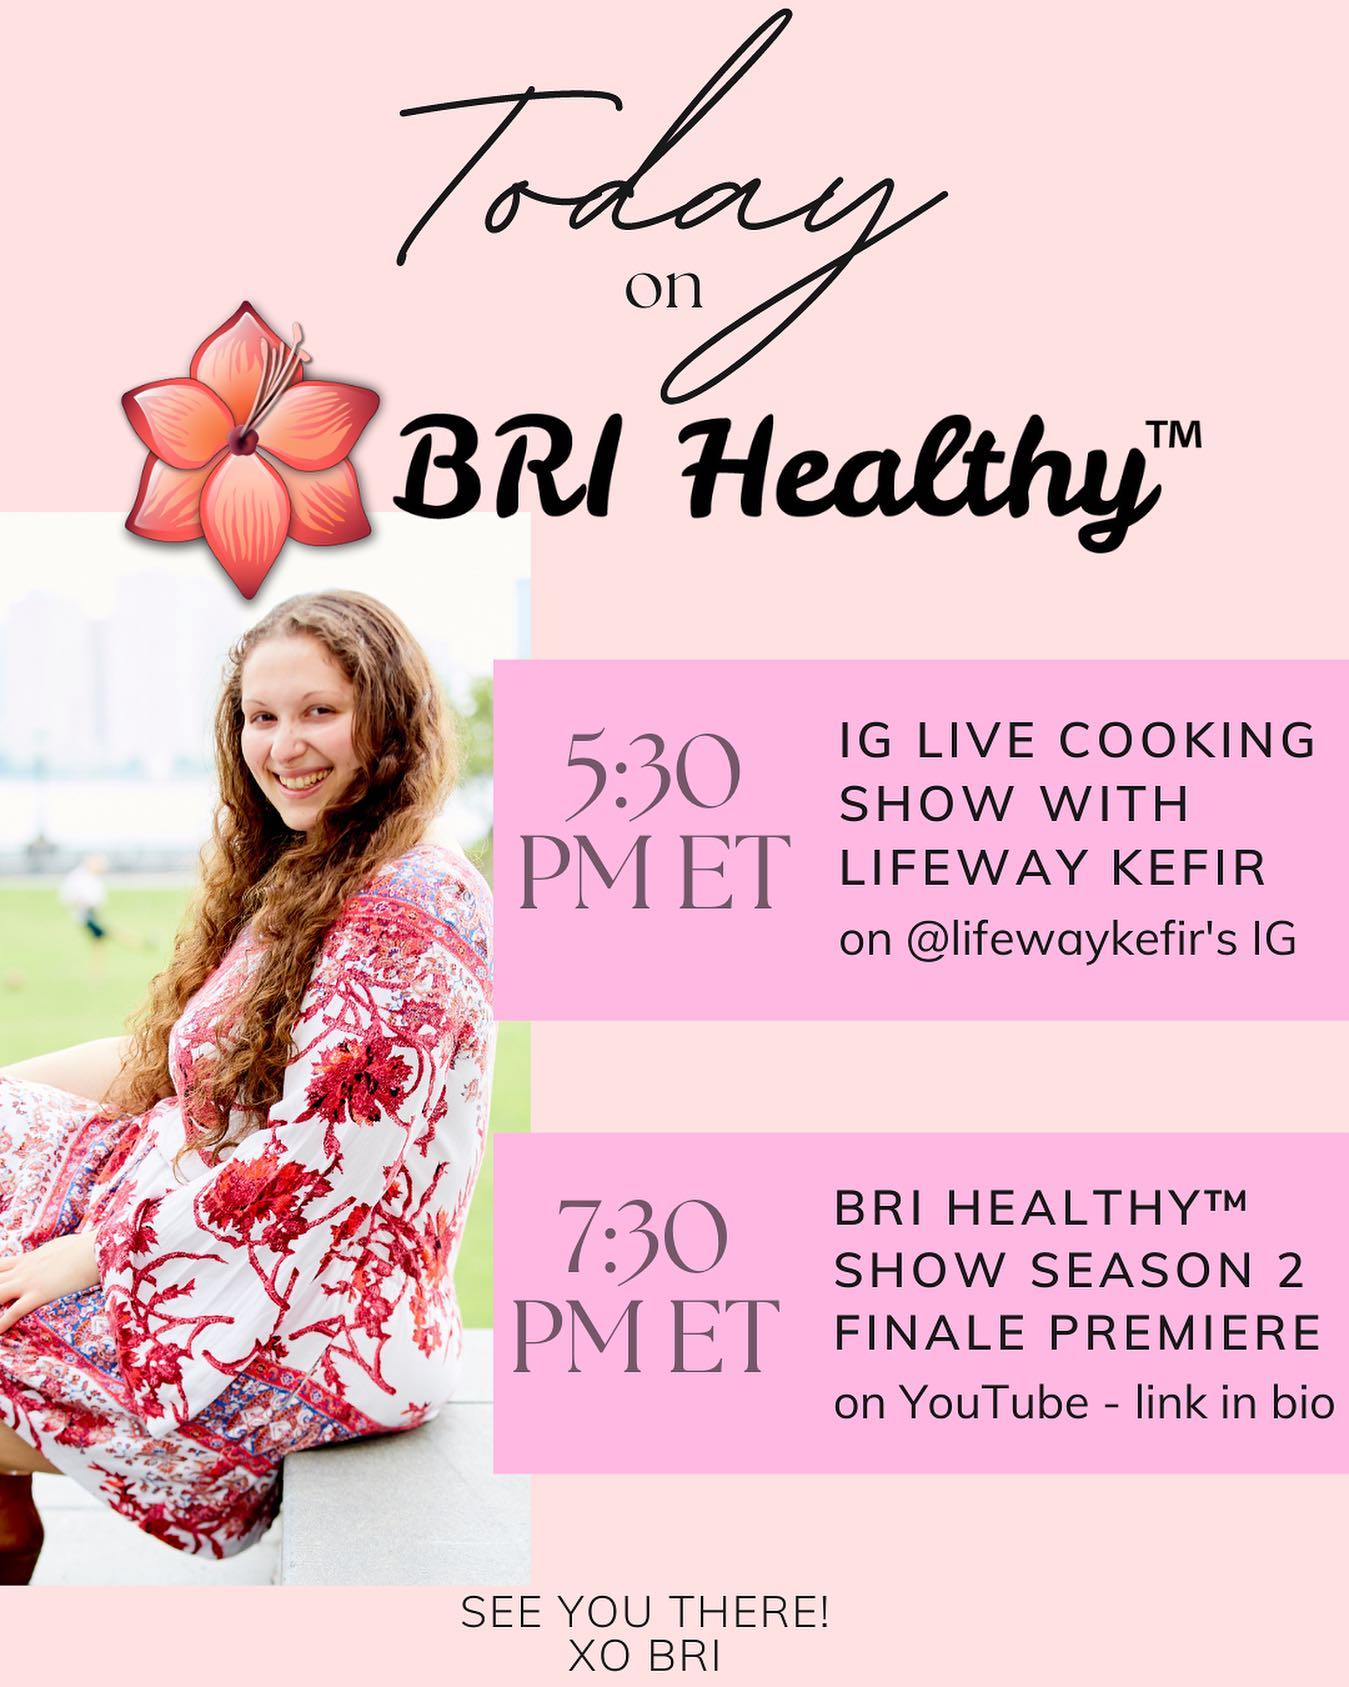 It’s an exciting day for @bri.healthy 🤩💖 Join me for one or both of my exciting shows today!

⭐️ 5:30 pm ET - Live Cooking Show on @lifewaykefir’s IG Live!
- I’ll be making a Healthy Fettucine Alfredo recipe using Lifeway Kefir!

⭐️ 7:30 pm ET - Bri Healthy Show Season 2 Finale Premiere on YouTube (Link in bio and in stories)
- Show theme: Healthy Personal Growth 💫
- Very Special Guest: Nigeria’s First Winter Olympian, Author Simidele Adeagbo (@simisleighs) 😍
- Eat the Rainbow Salad 🌈

Remember, the IG live will be on @lifewaykefir’s page, not mine! Tap the link in my bio for my show premiere link on YouTube. ✨

I’m so excited to see you there! What a beautiful, amazing day! 🥰💖 #BriHealthy

📸: @daphneyoureephotography